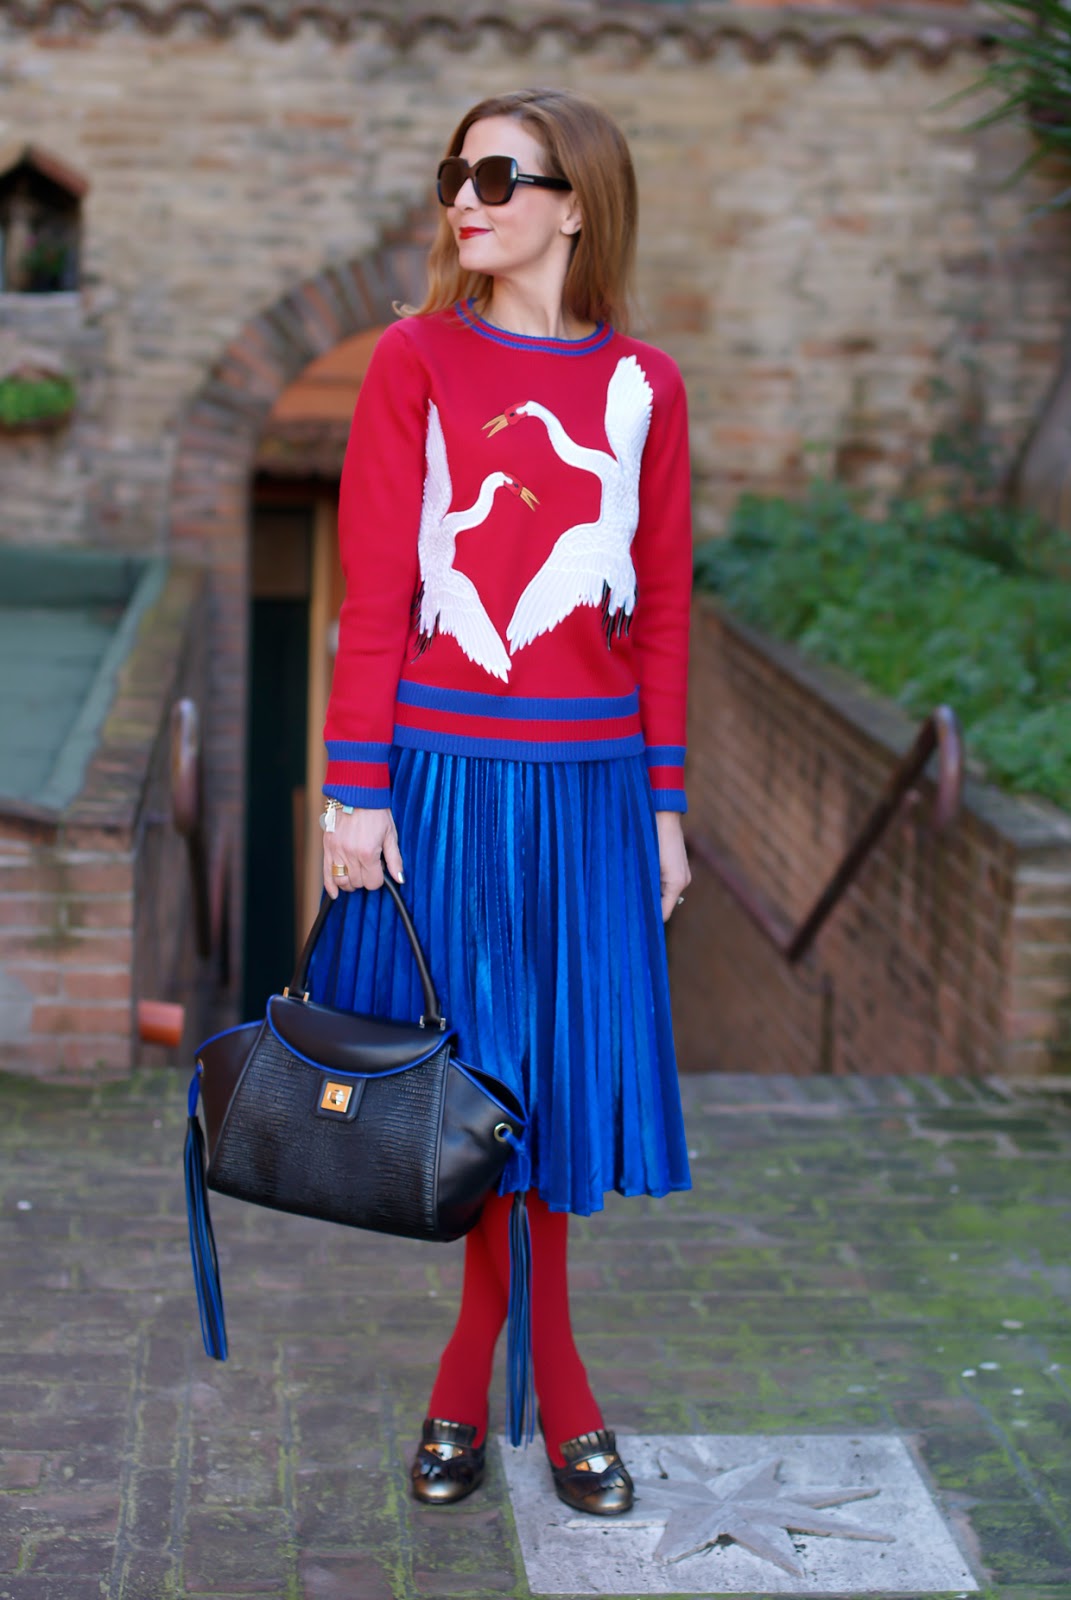 Dezzal bird embroidered sweater, metallic pleated skirt and Iaya Asciani Paris bag on Fashion and Cookies fashion blog, fashion blogger style